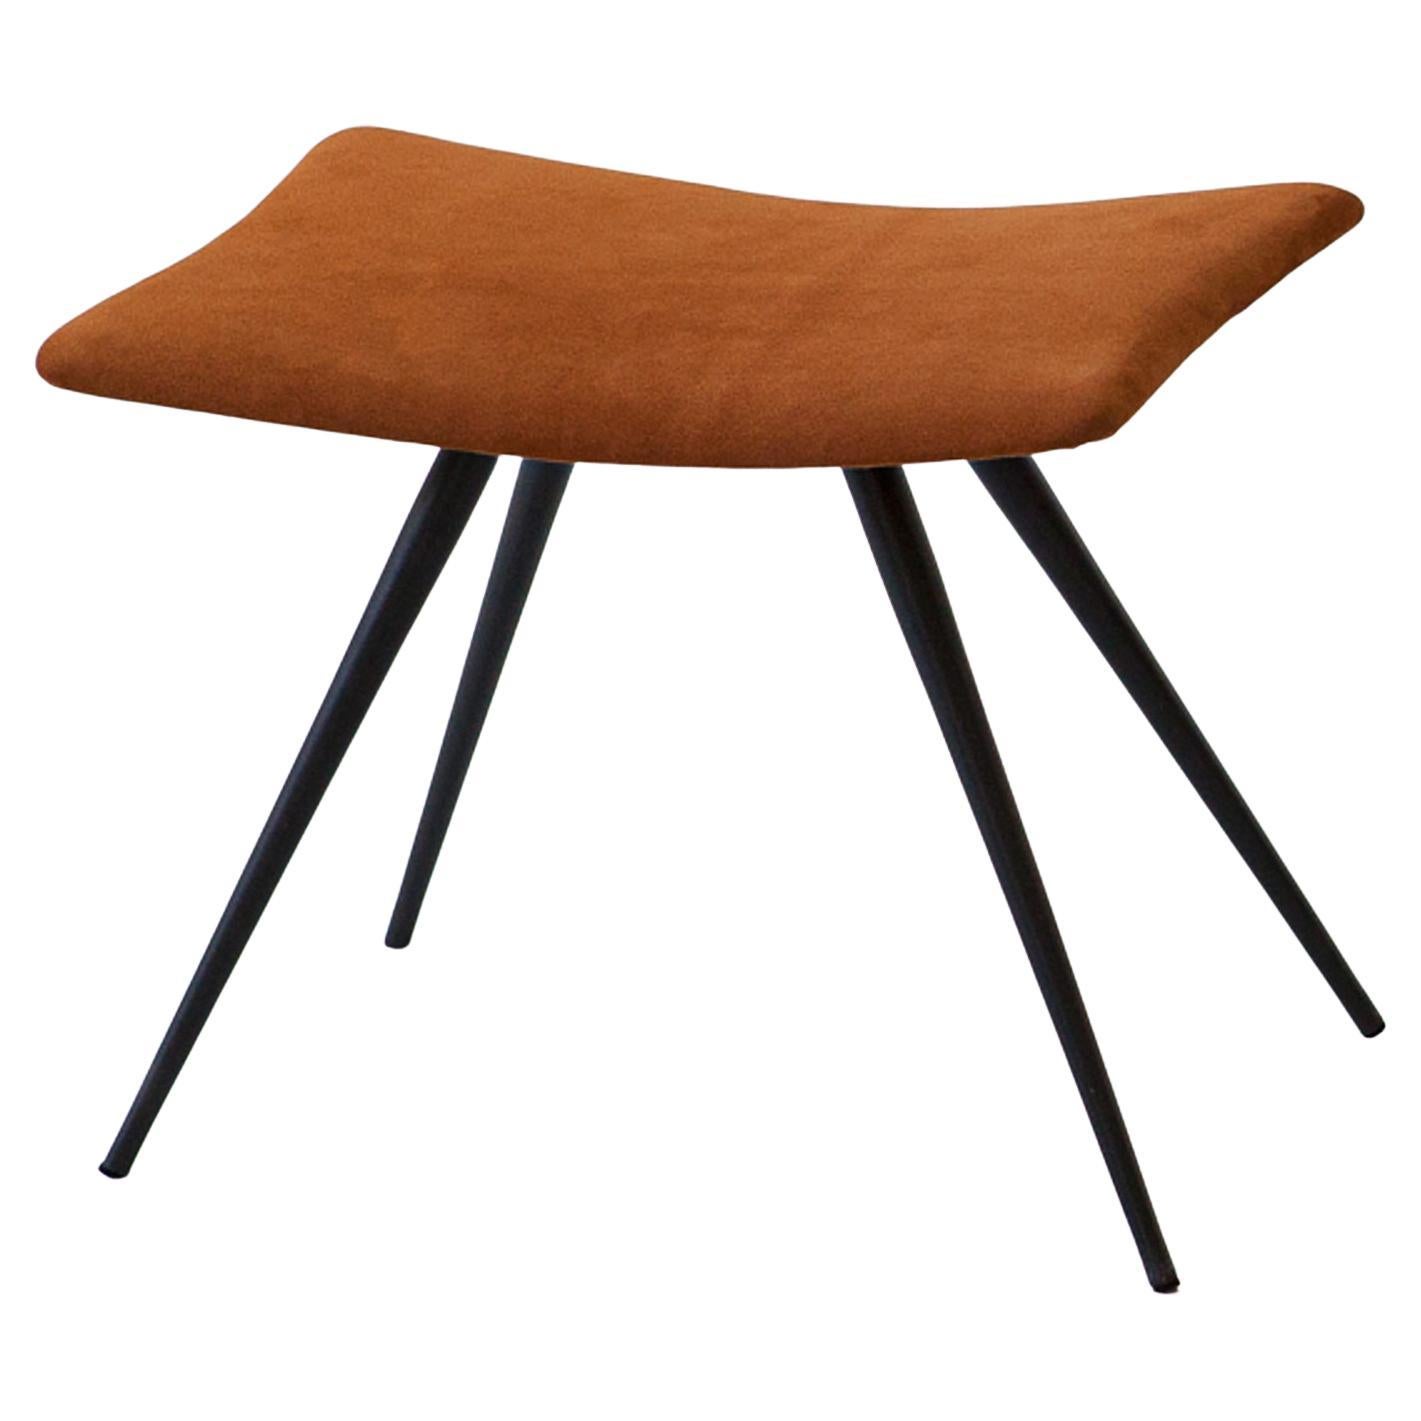 Italian Stool in Cognac Suede Leather and Black Steel Conical Legs, 1950s For Sale